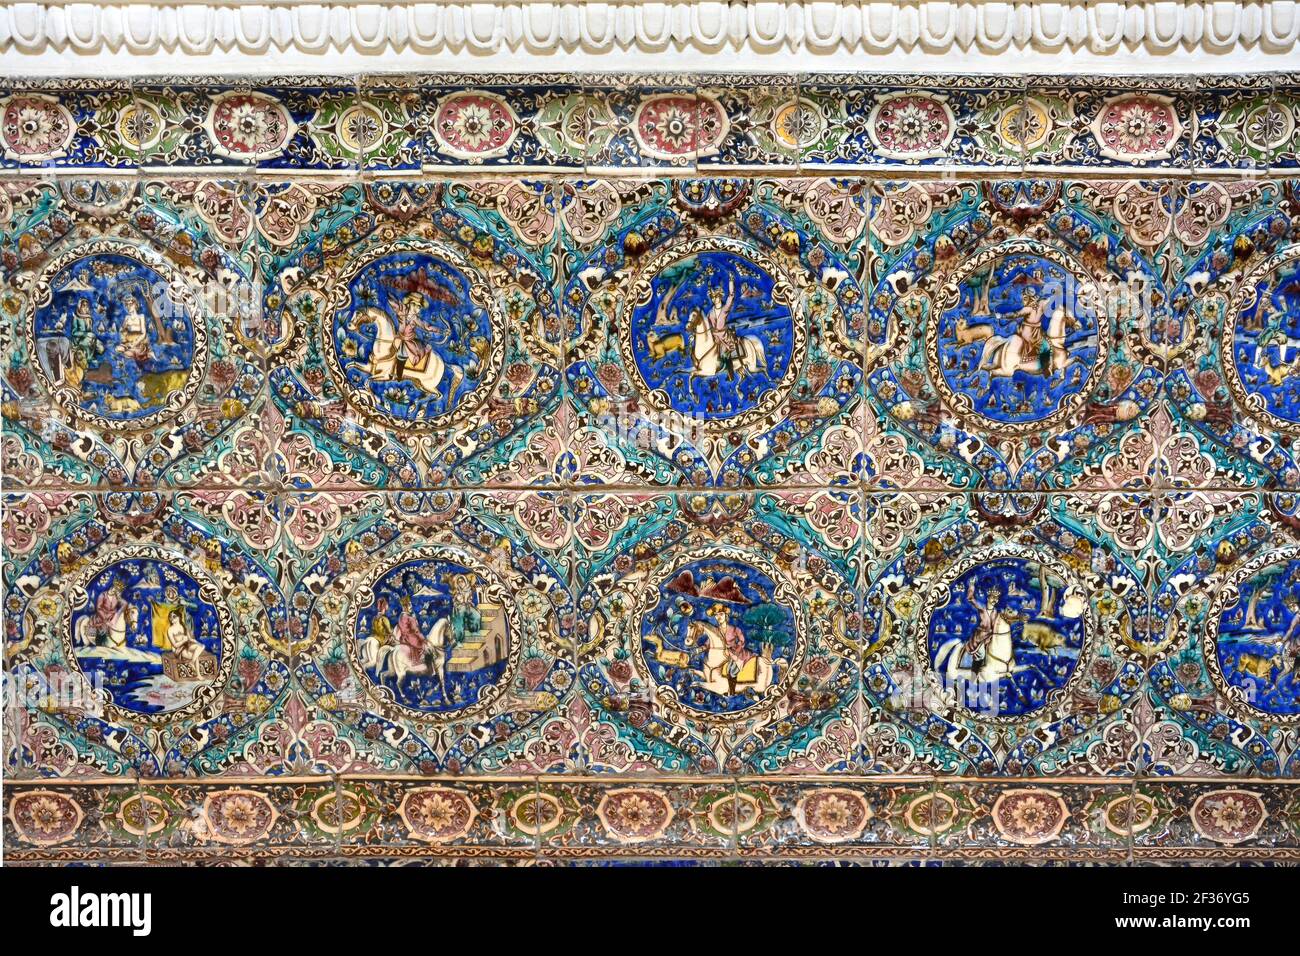 Golestan Palace, Tehran. Detail of tiled mural in the interior of the main building Stock Photo